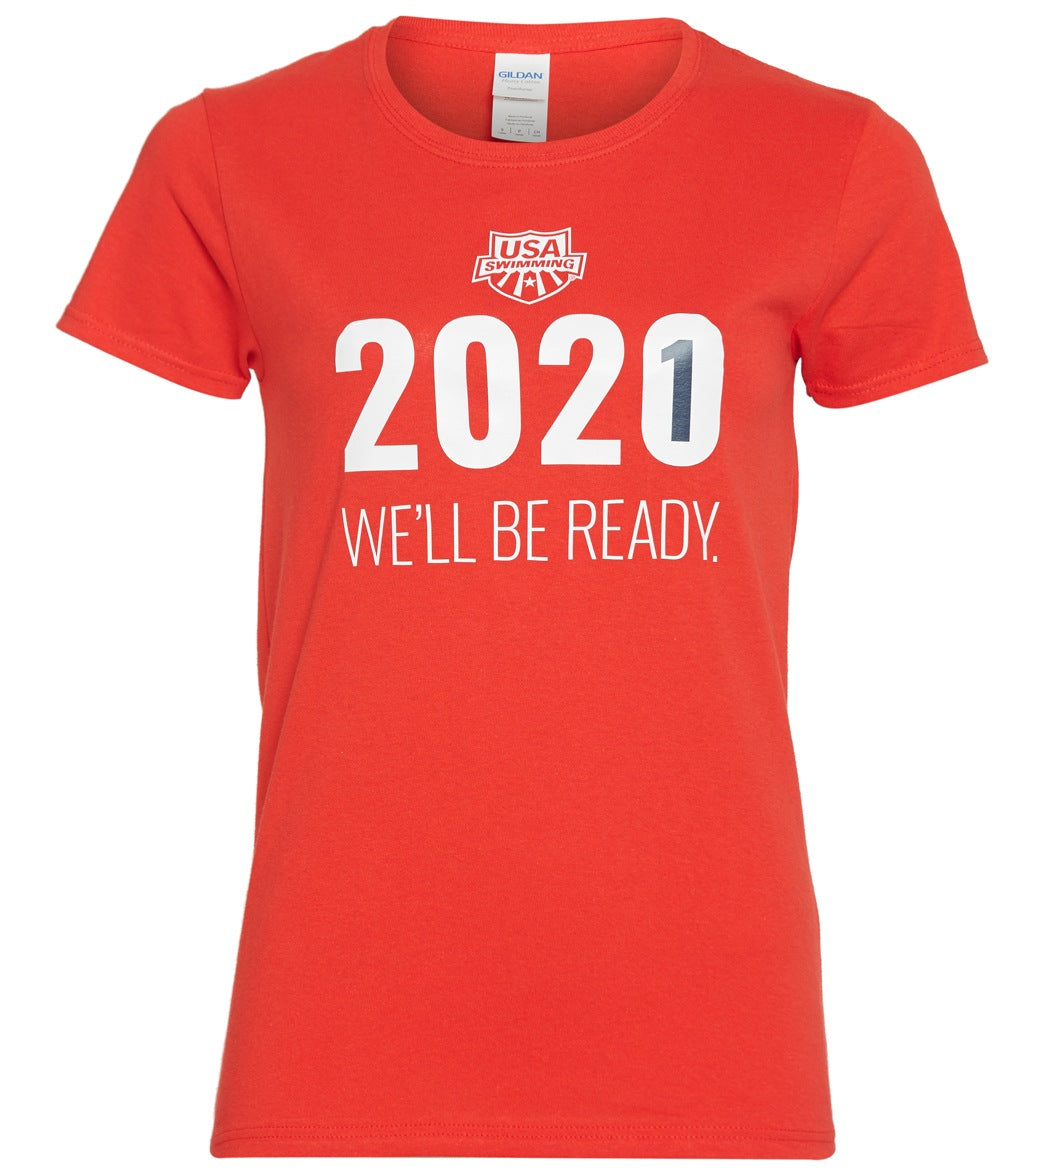 USA Swimming Womens 2021 We Will Be Ready Crew Neck T-Shirt at SwimOutlet 